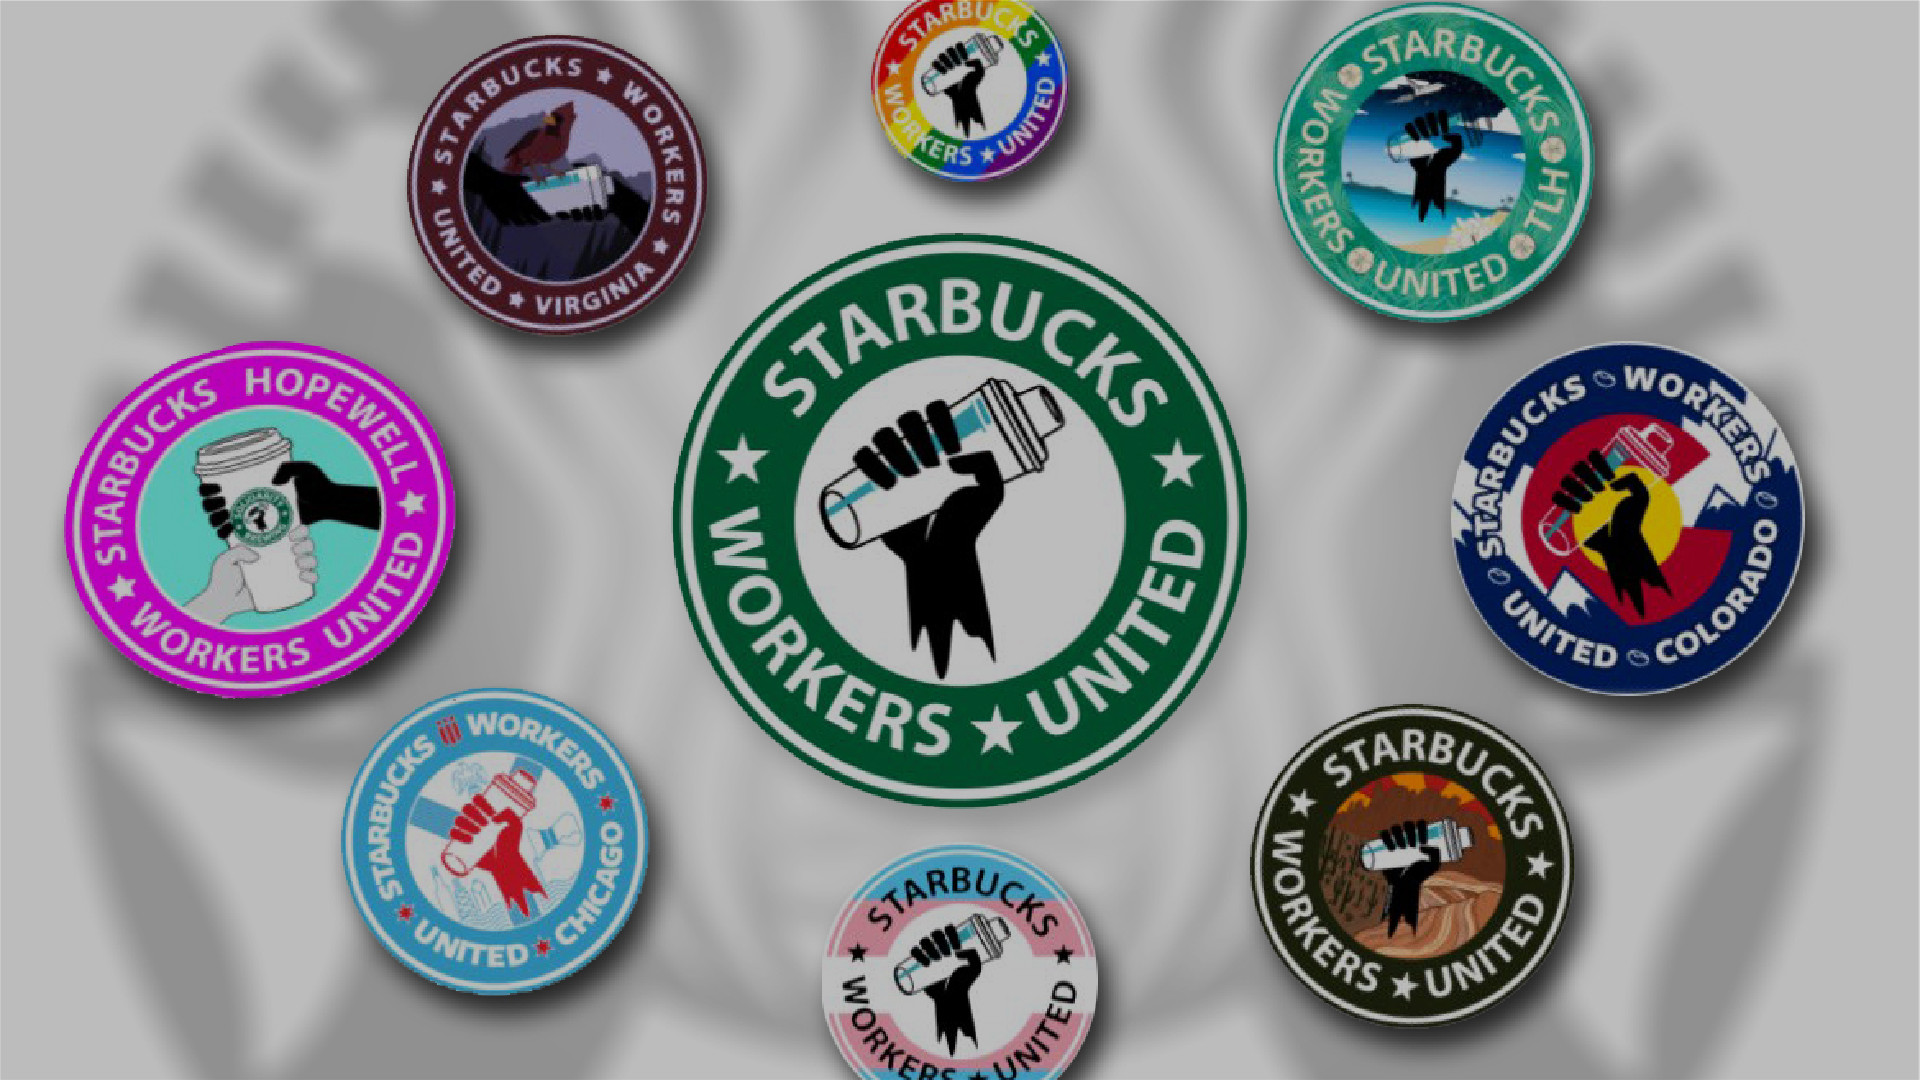 BREAKING (the) NEWS - Starbucks Busting Unions